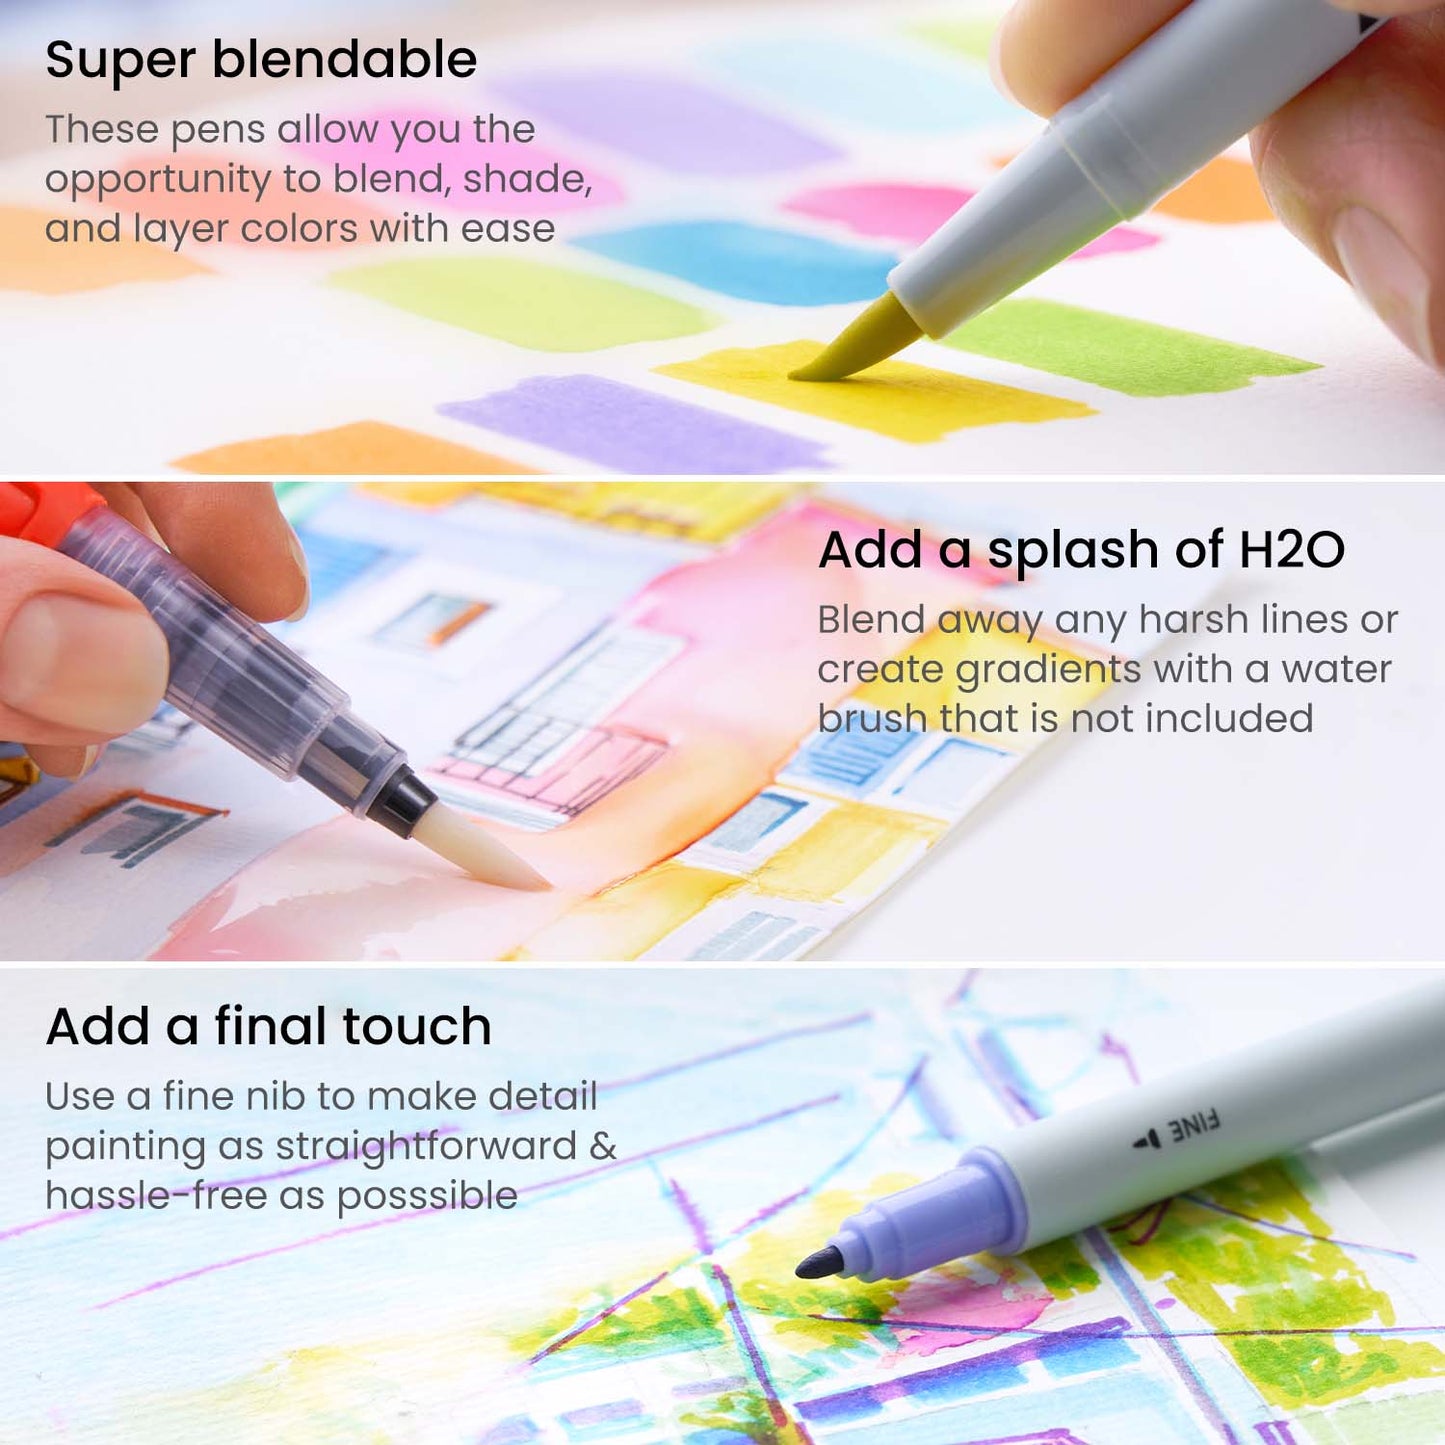 EverBlend® Ultra H2O Brush Pens, Bright & Neon Tones - Set of 24